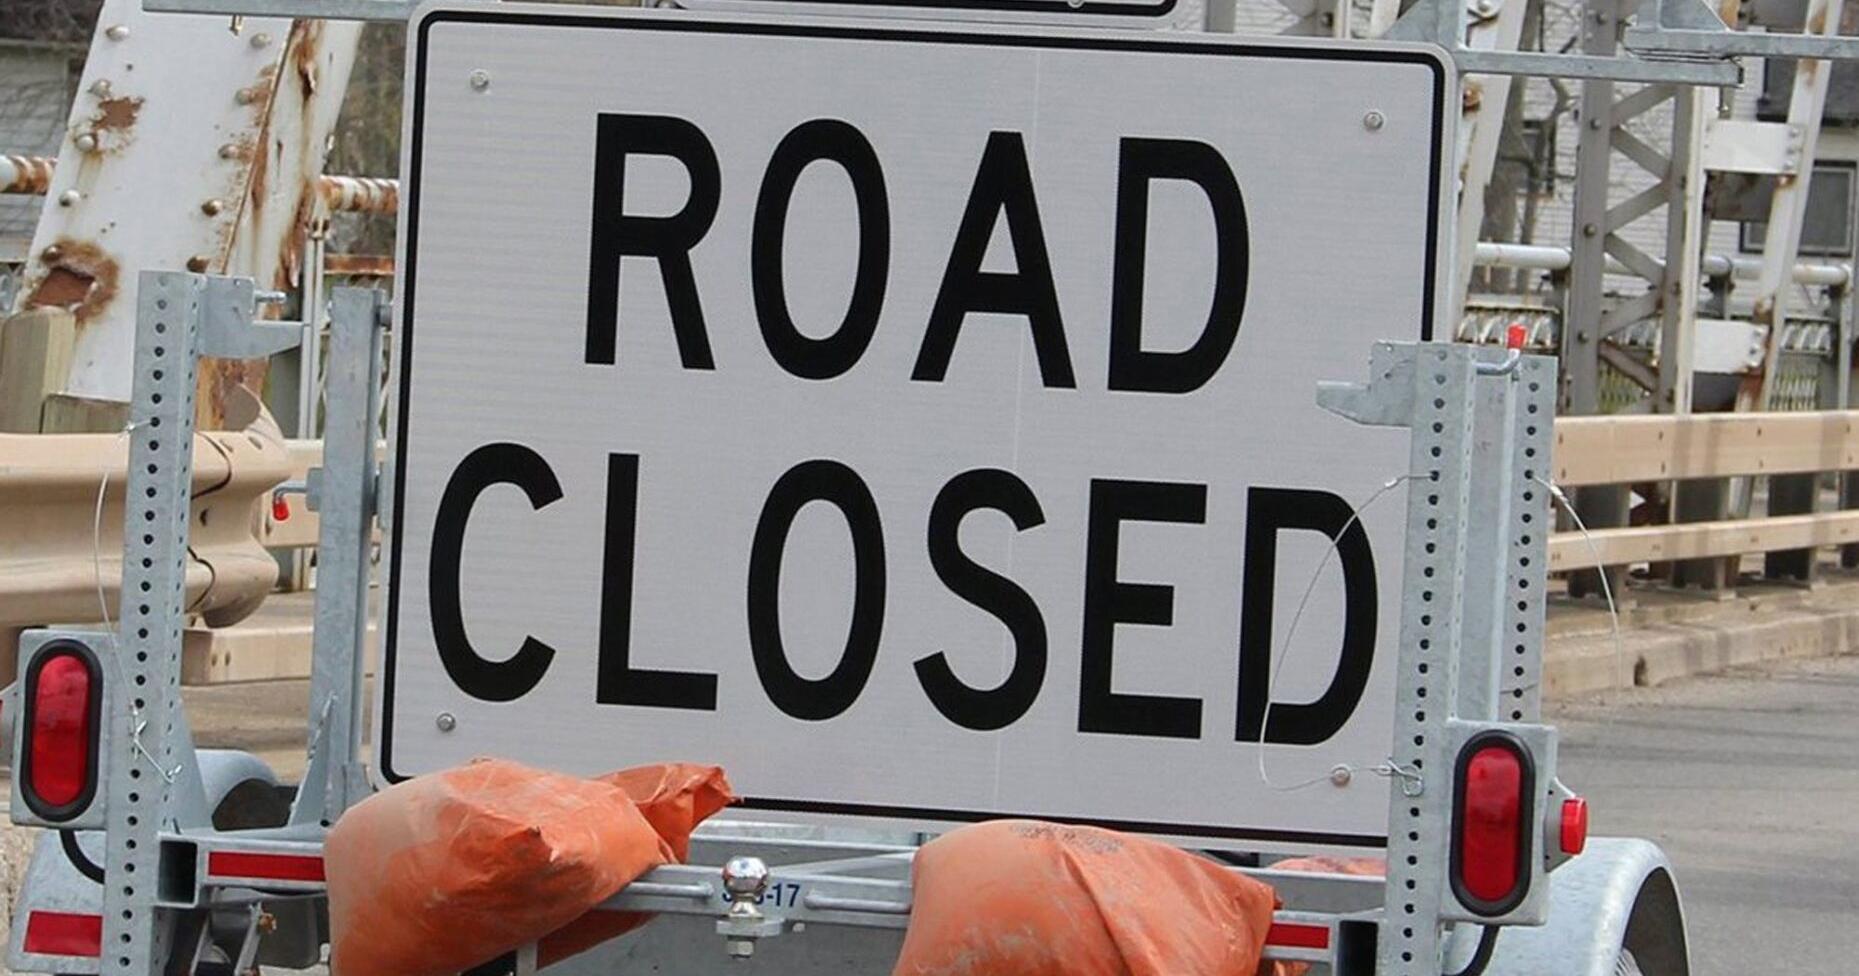 Wednesday, May 31 updates on traffic, weather and road closures